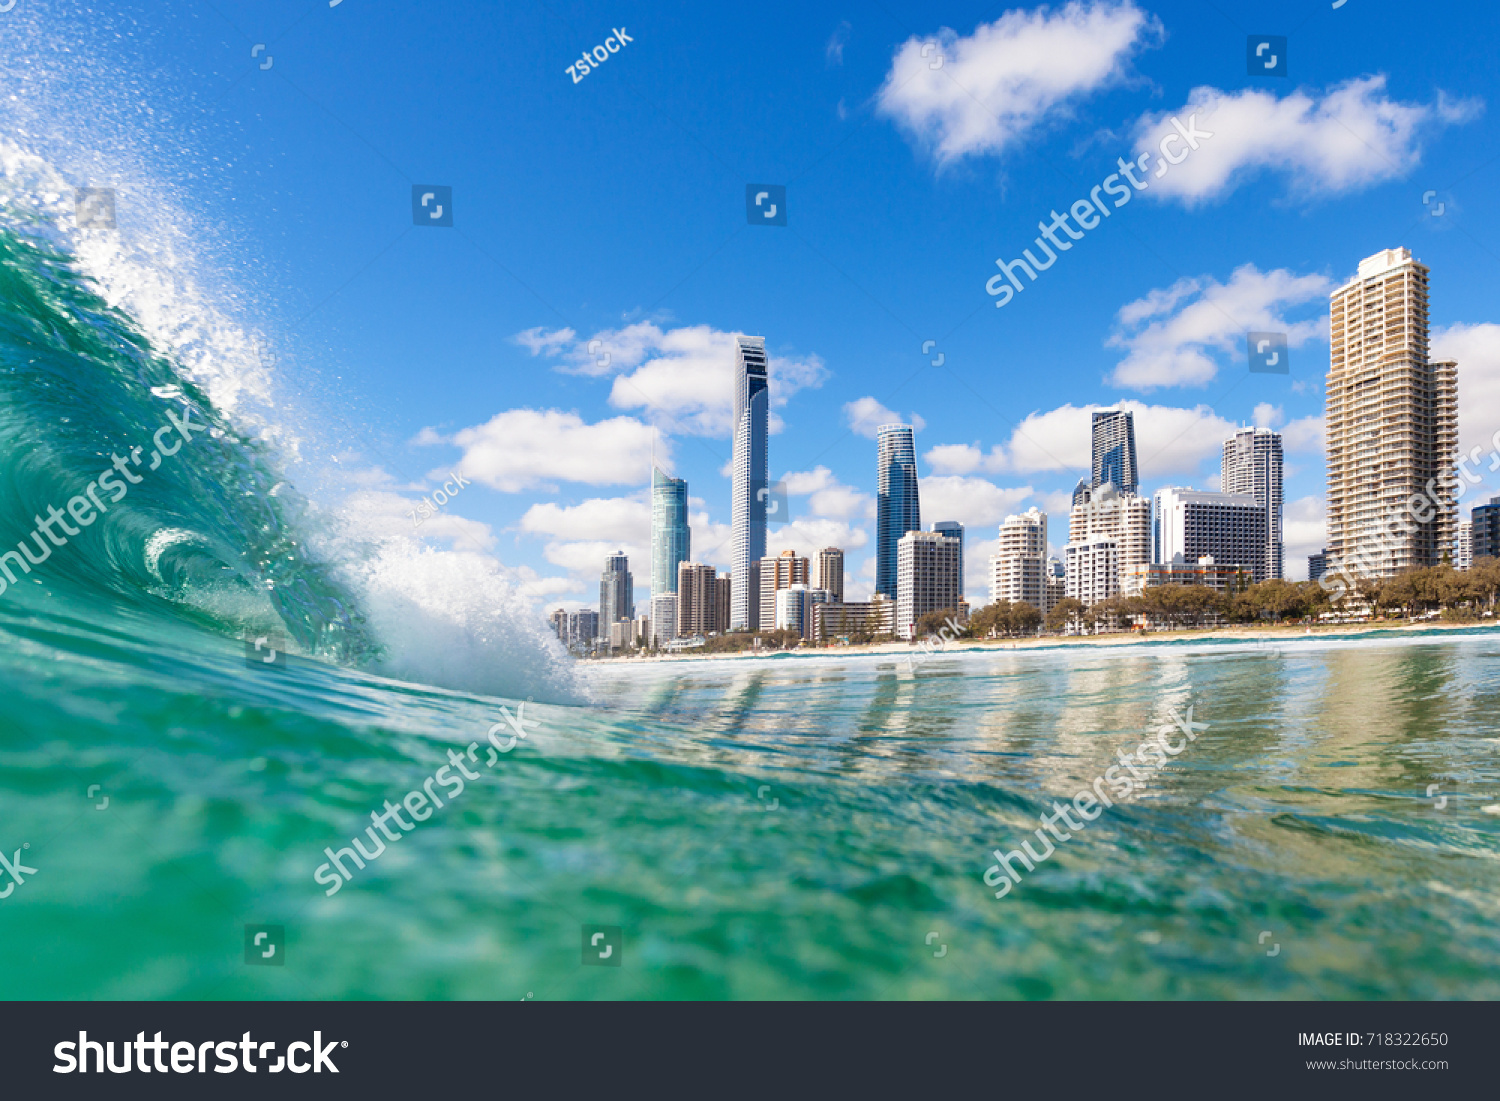 View from the water of Surfers Paradise on the Gold Coast, Australia #718322650